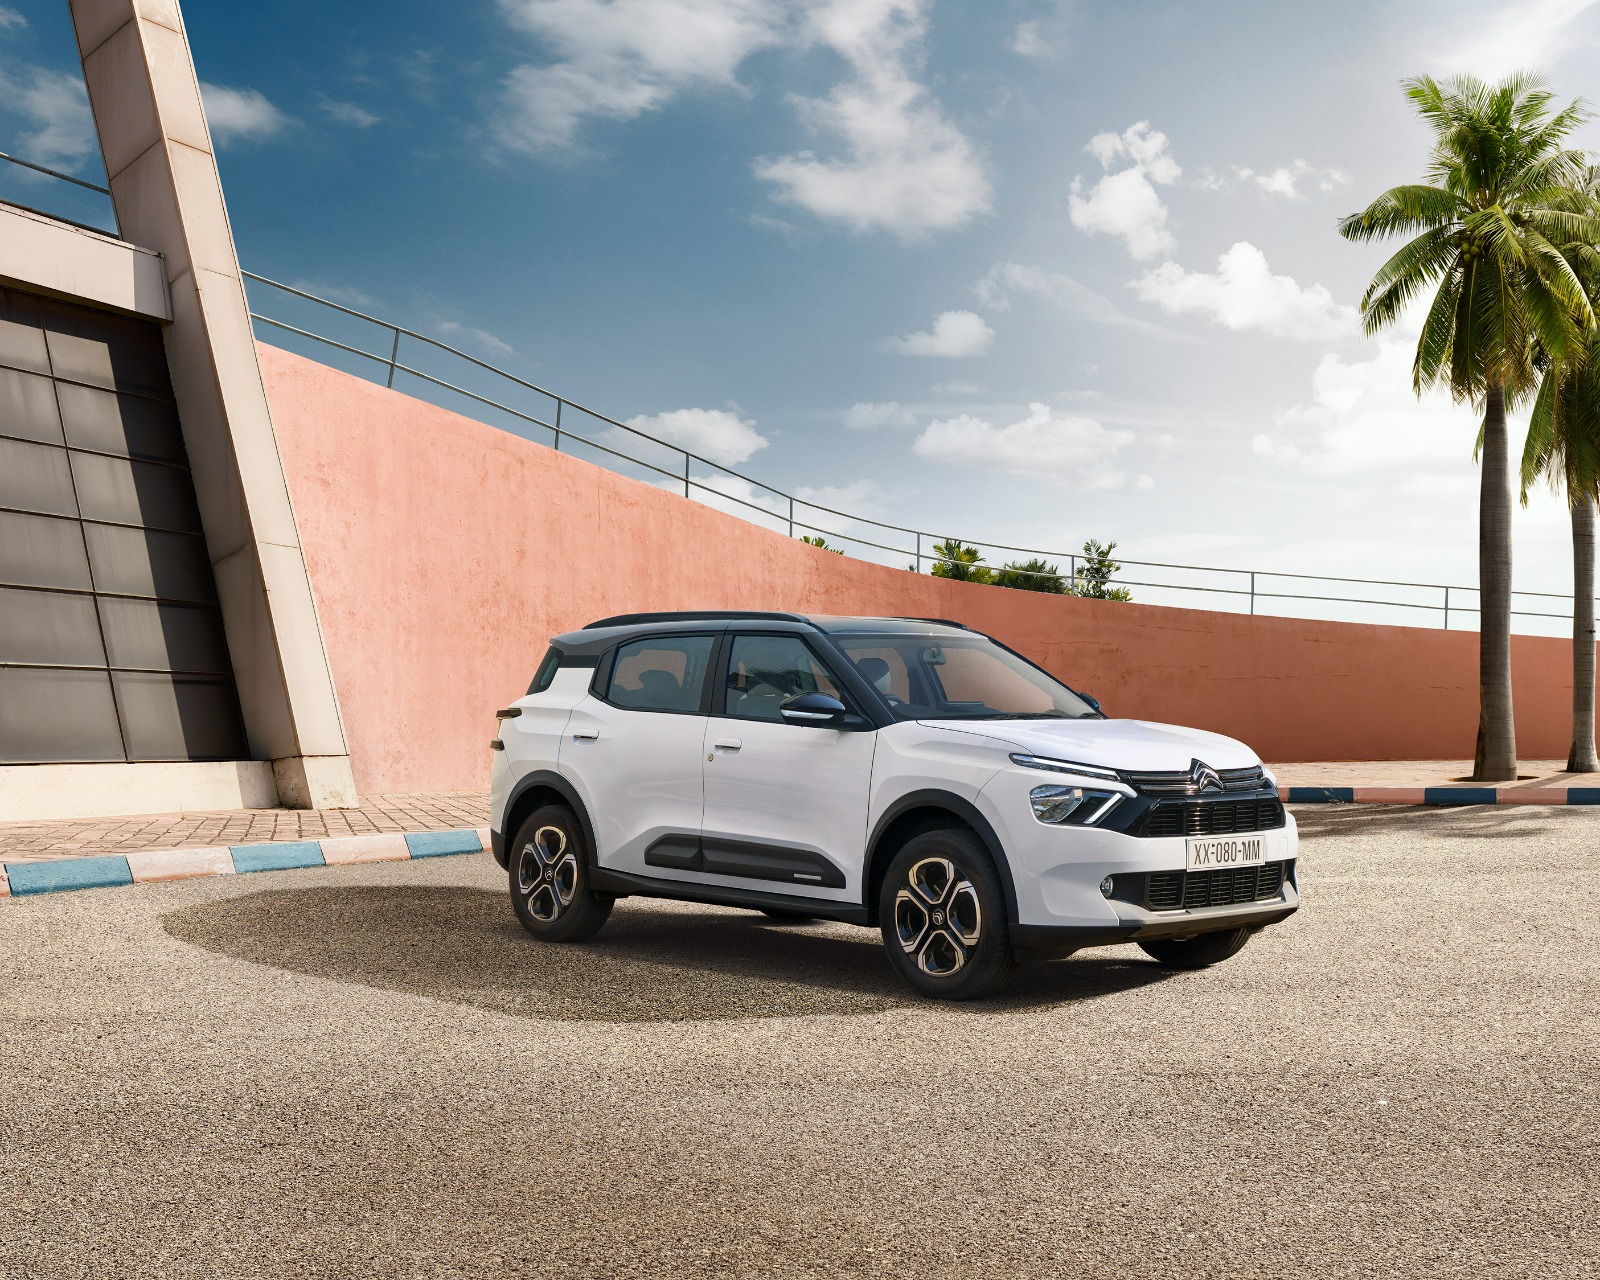 CITROËN REVEALS      ALL-NEW C3 AIRCROSS SUV, INTELLIGENTLY CRAFTED FOR CUSTOMERS IN INDIA